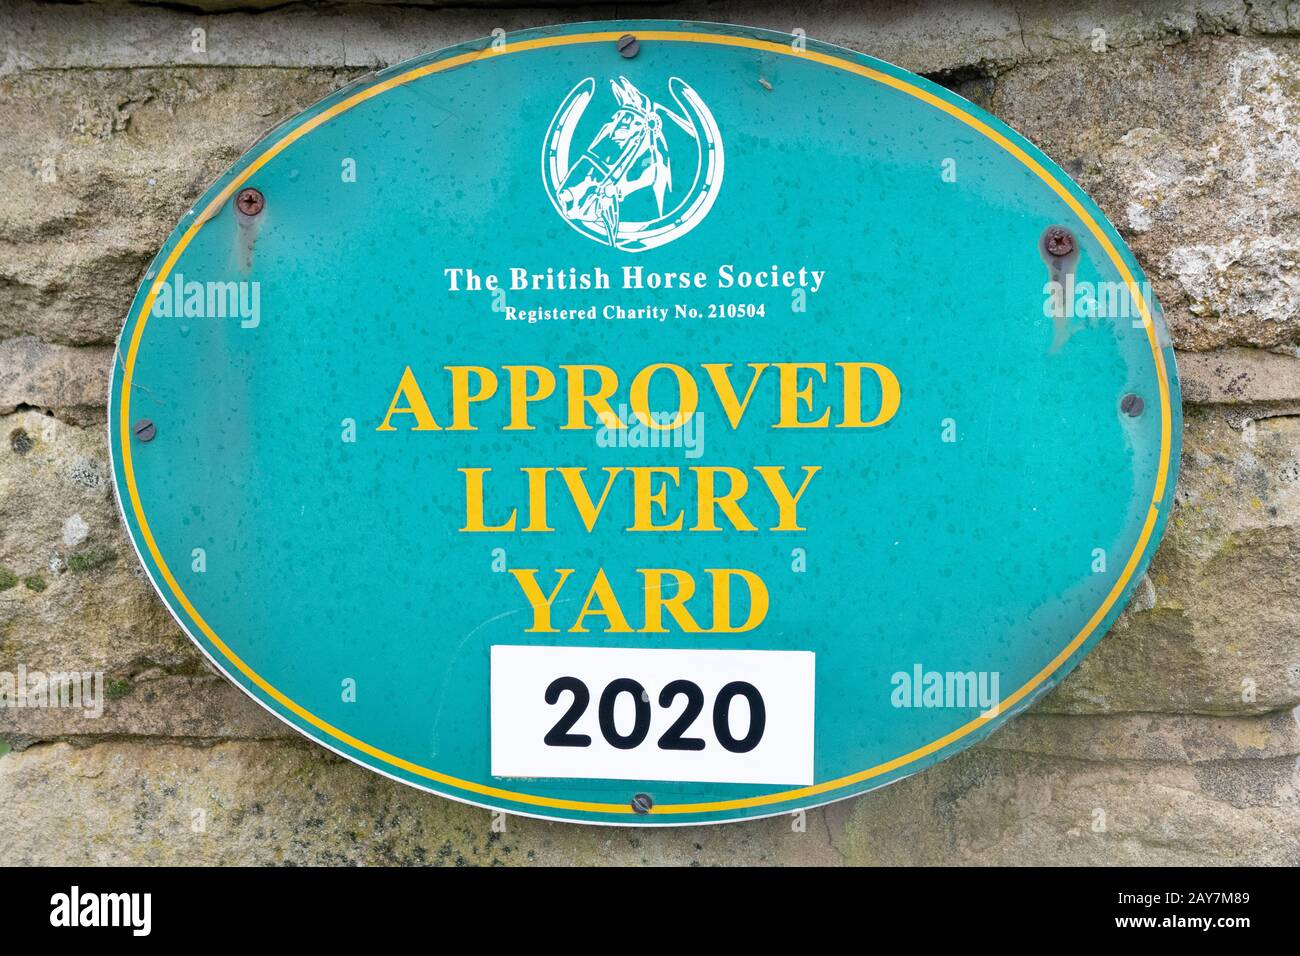 The British Horse Society Approved Livery Yard 2020 sign, England, UK Stock Photo